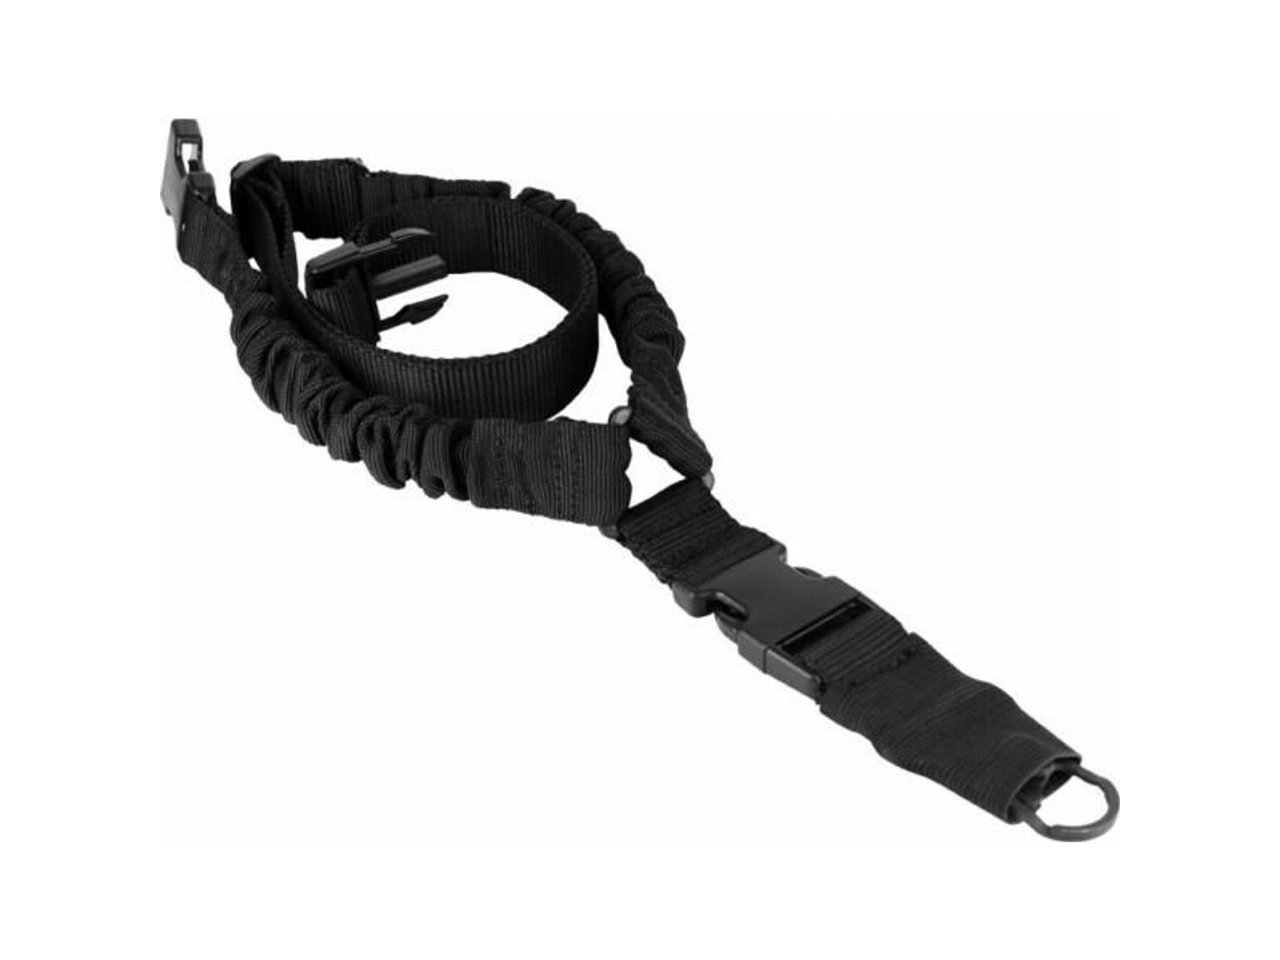 Aim Sports One Point Bungee Rifle Sling, Black